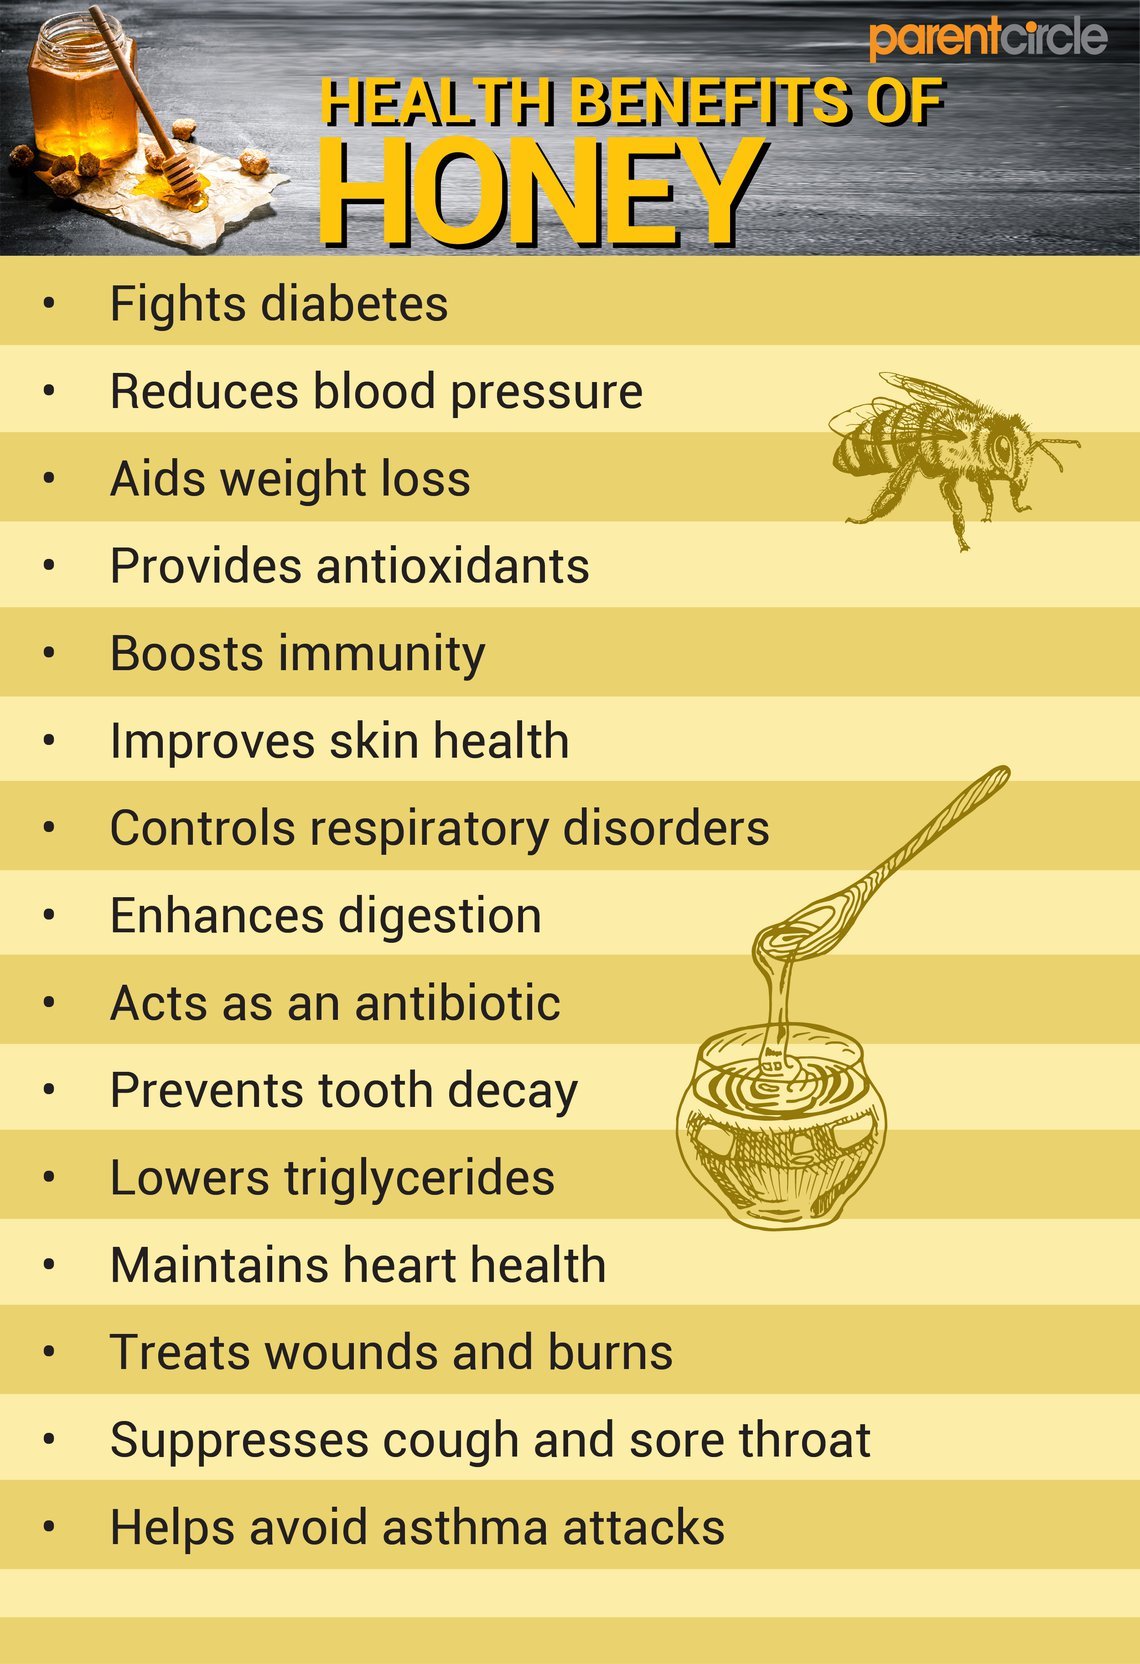 Honey Health Benefits And Calories Honey Nutritional Facts And Value Per 100g How To Choose